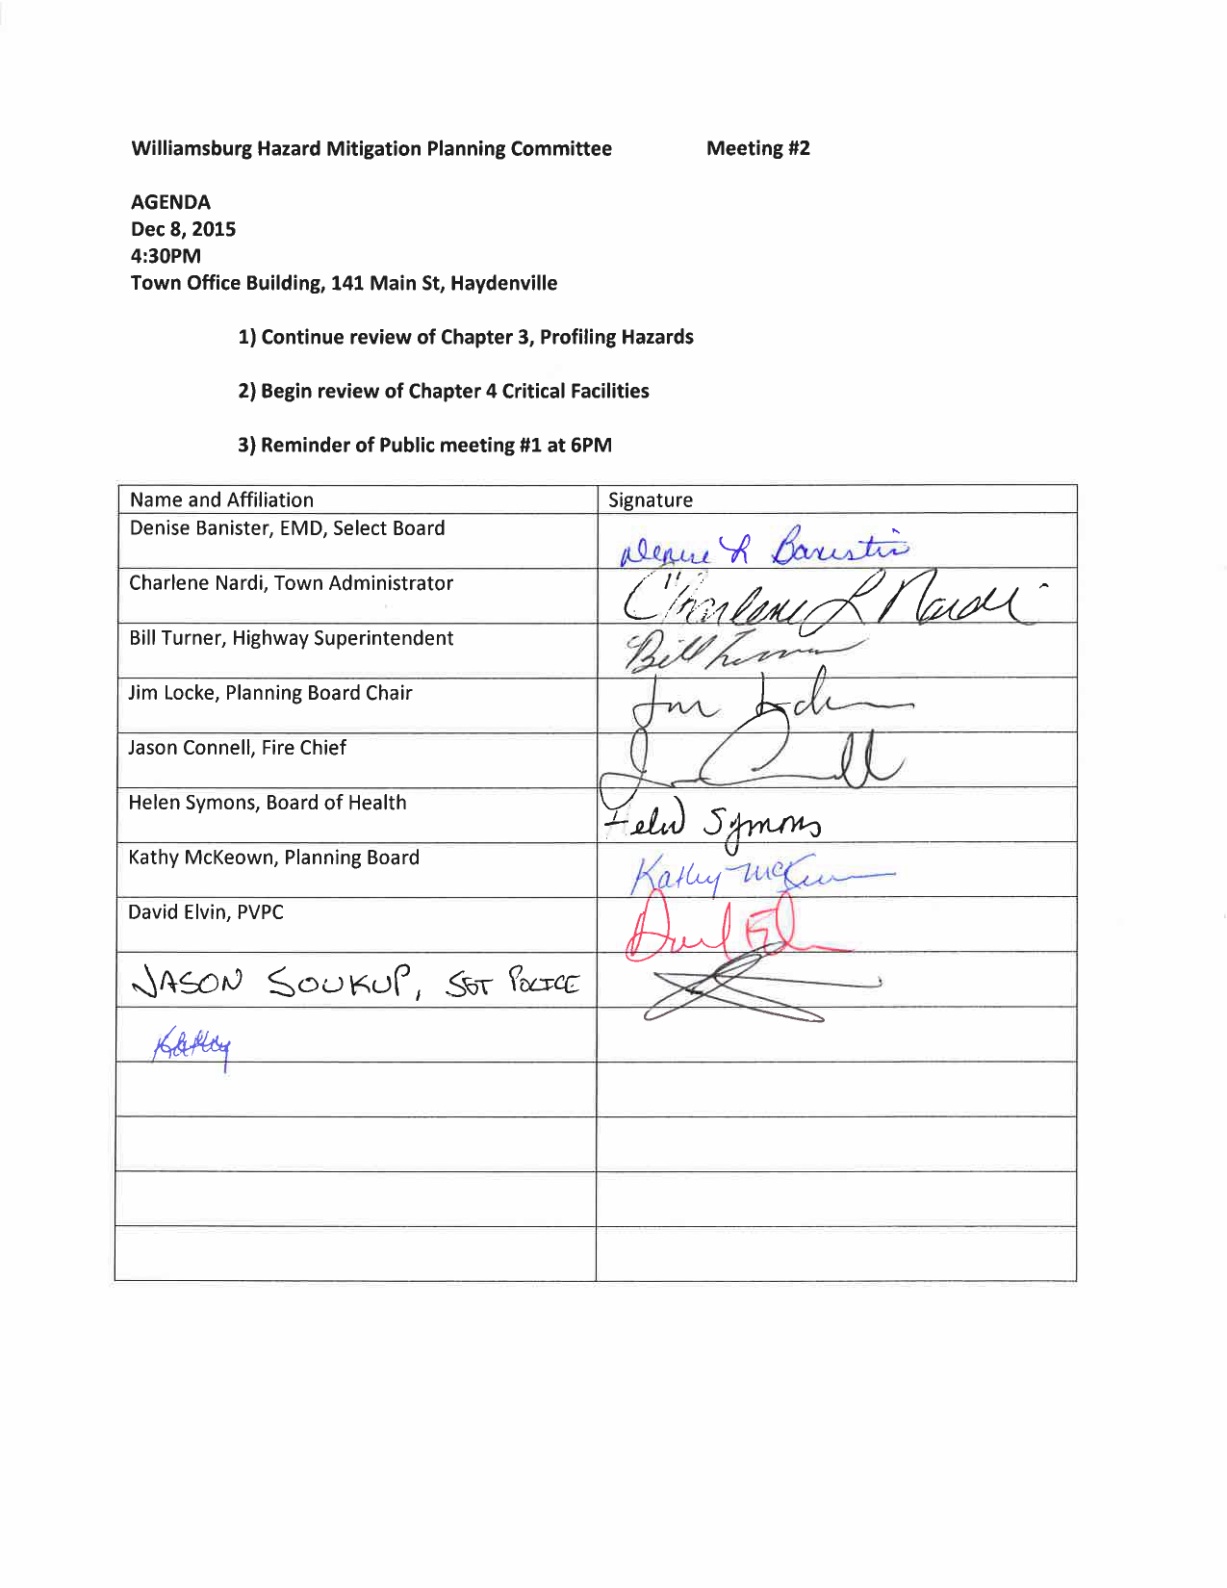 williamsburg hazmit committee and public mtgs sign-ins dec 2015_page_2.jpg